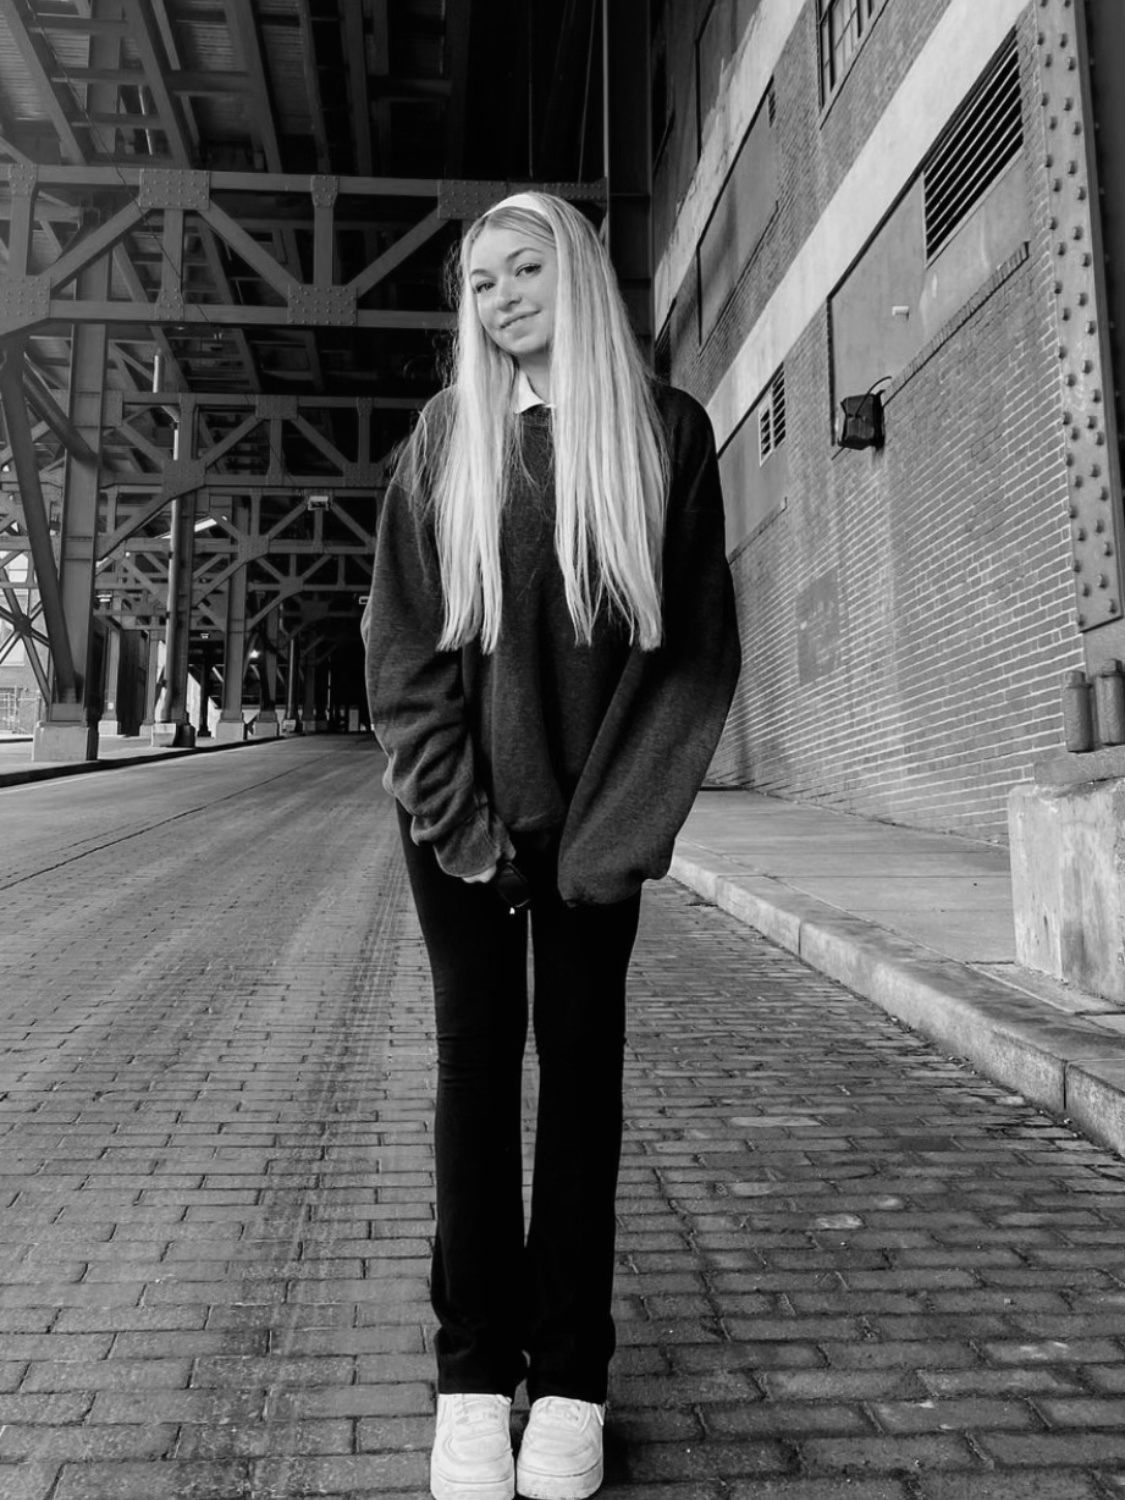 A young woman with long blonde hair stands on a brick walkway at Ohio State University.